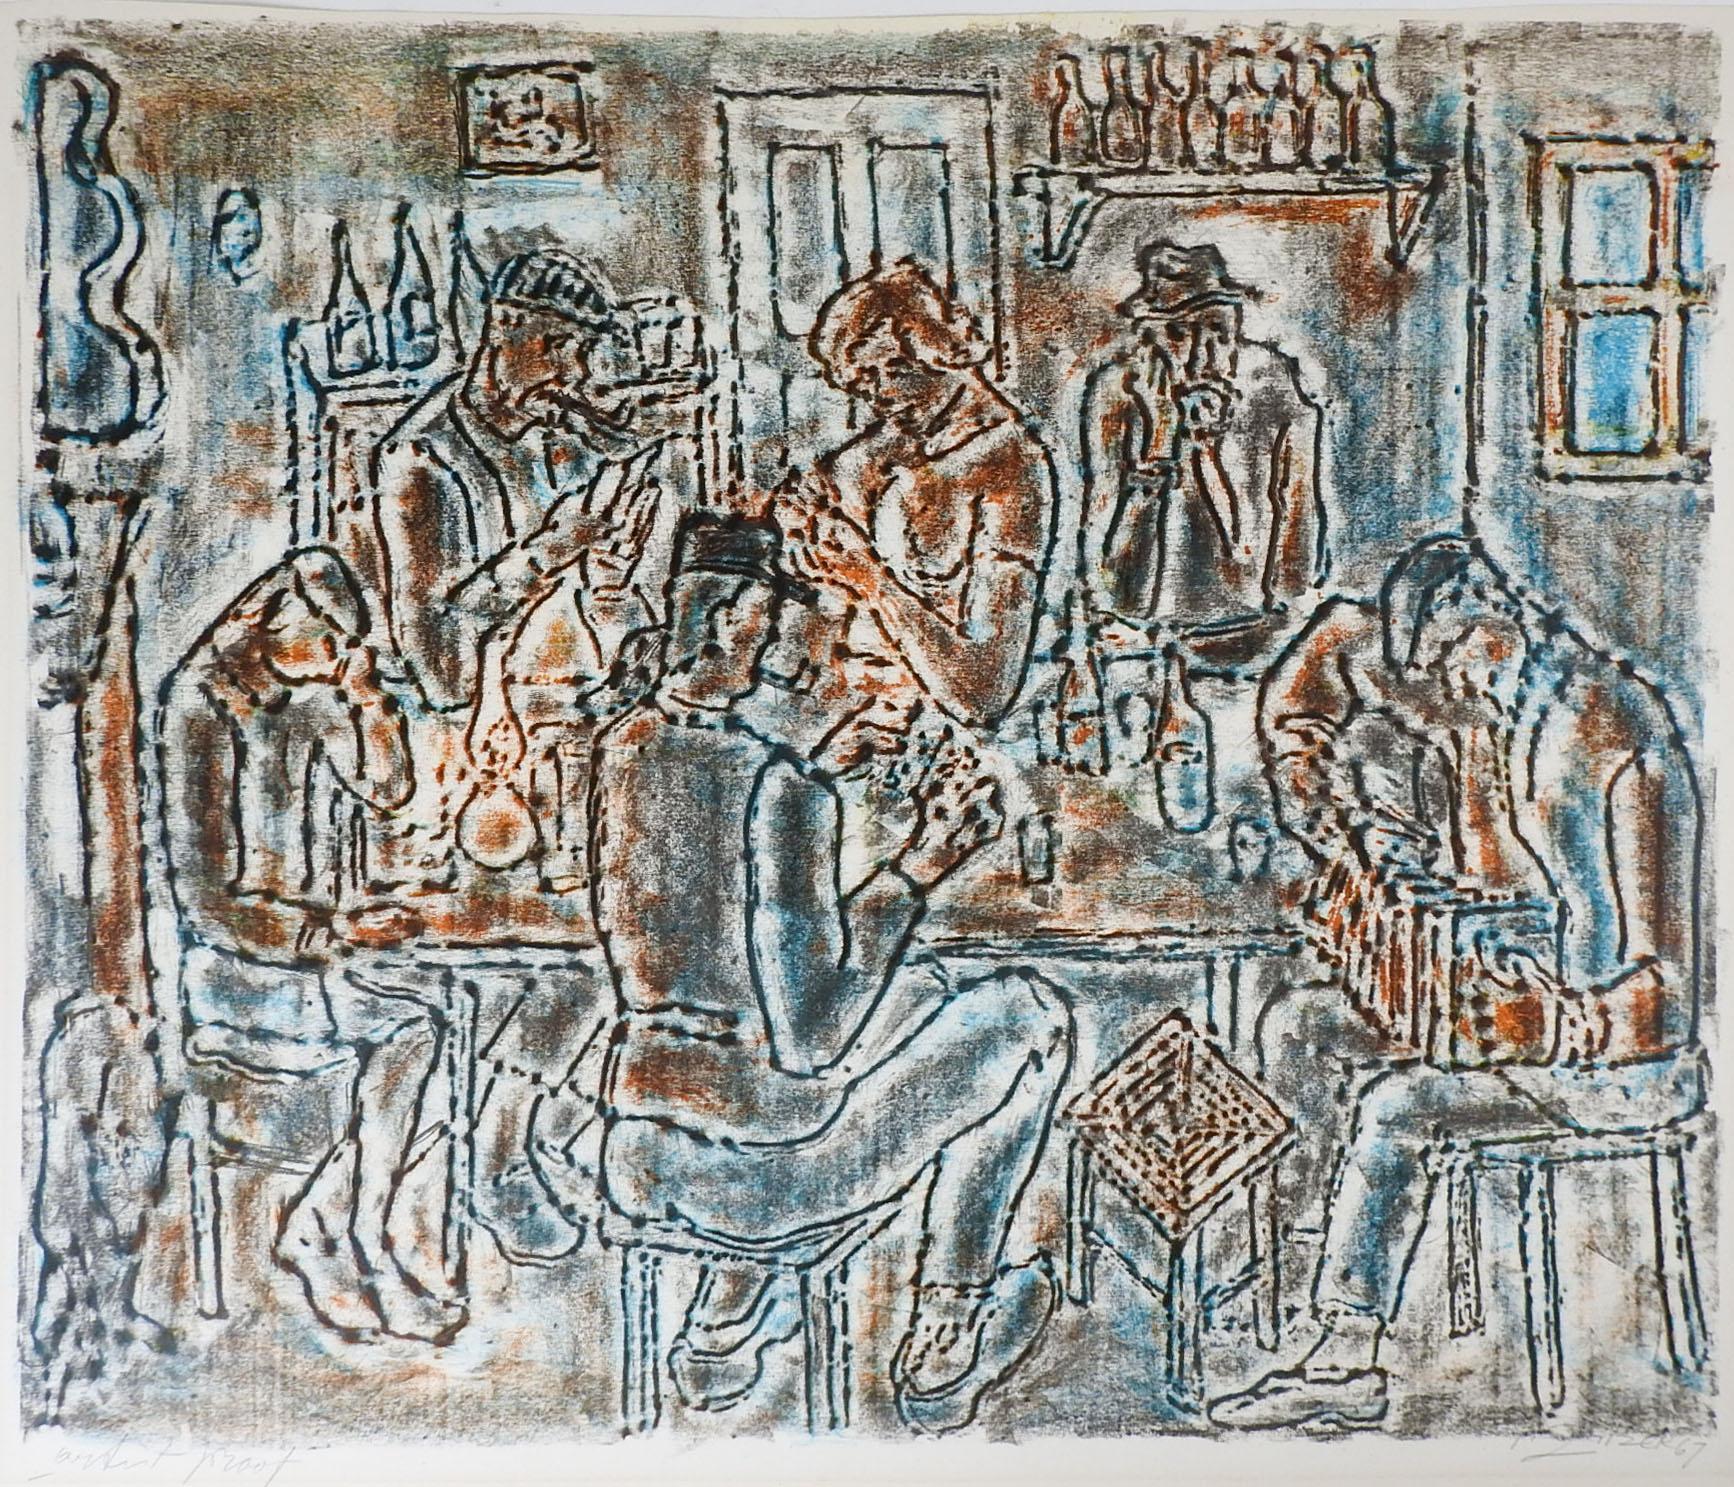 Vintage 1967 lithograph on paper abstract tavern scene by Gyula Zilzer (1898-1969) Hungary, California. Signed, dated, artist proof in pencil along lower margin. Unframed, age toning along edges.